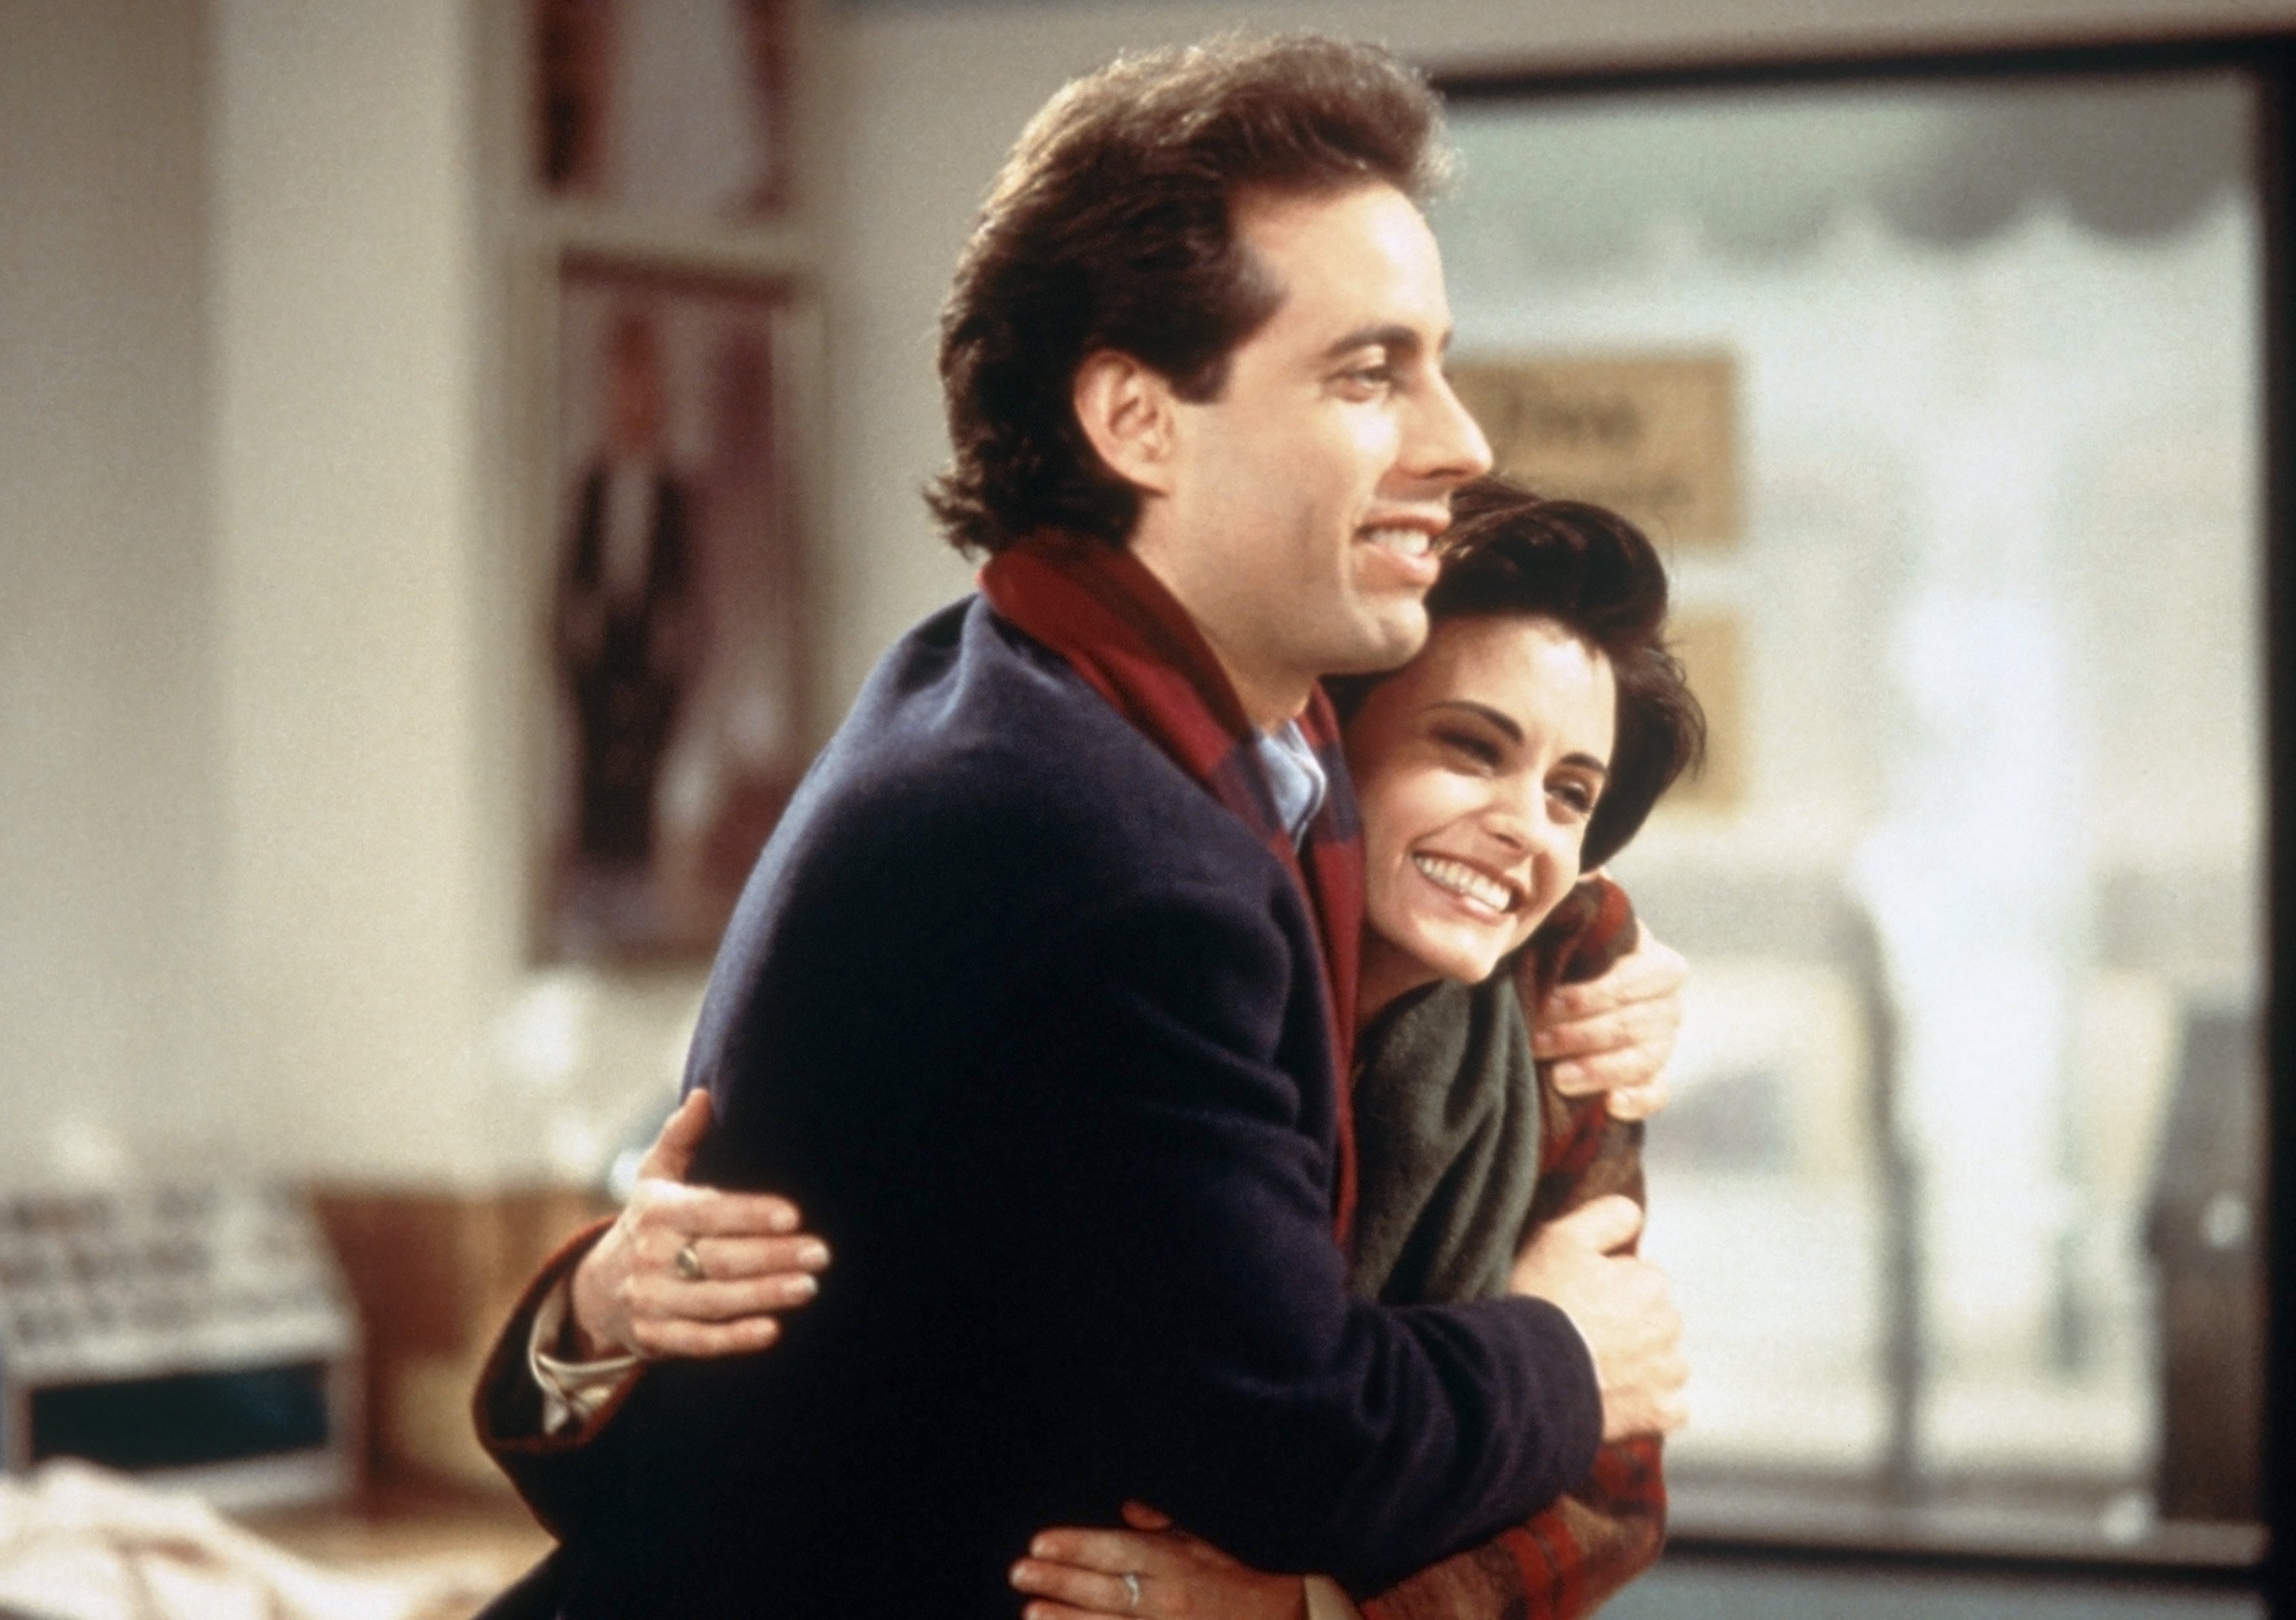 Jerry Sienfeld as Jerry and Courteney Cox as Meryl stand in a dry cleaners during a scene for 'Seinfeld'